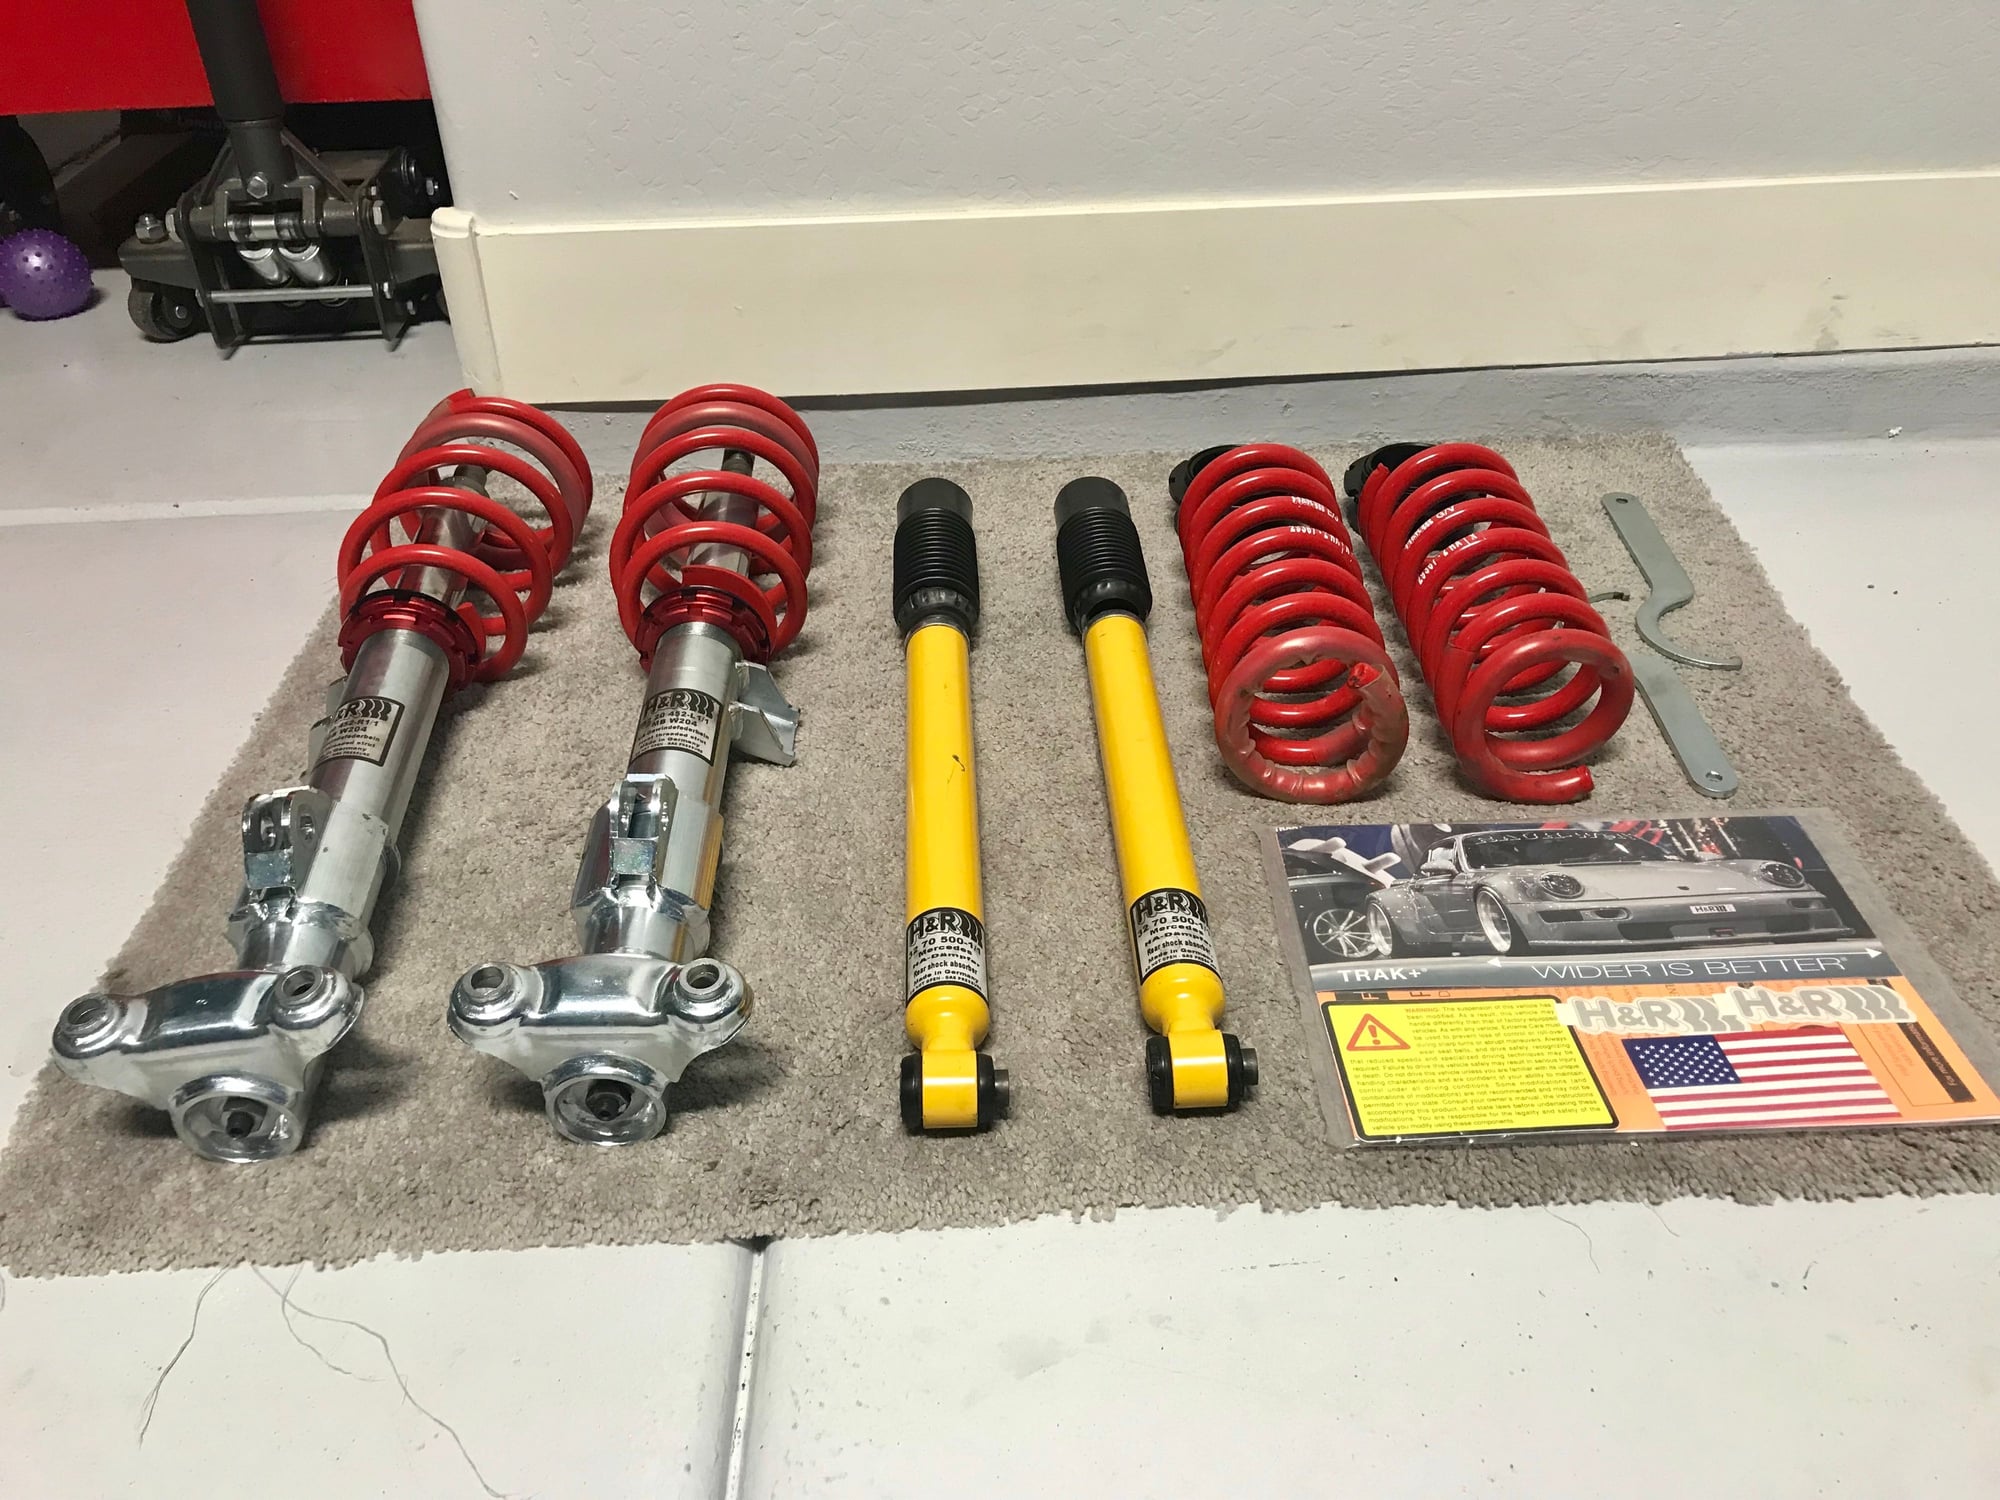 Steering/Suspension - H&R Performance Coil-Overs Like New - Used - 2008 to 2015 Mercedes-Benz C63 AMG S - Peoria, AZ 85383, United States